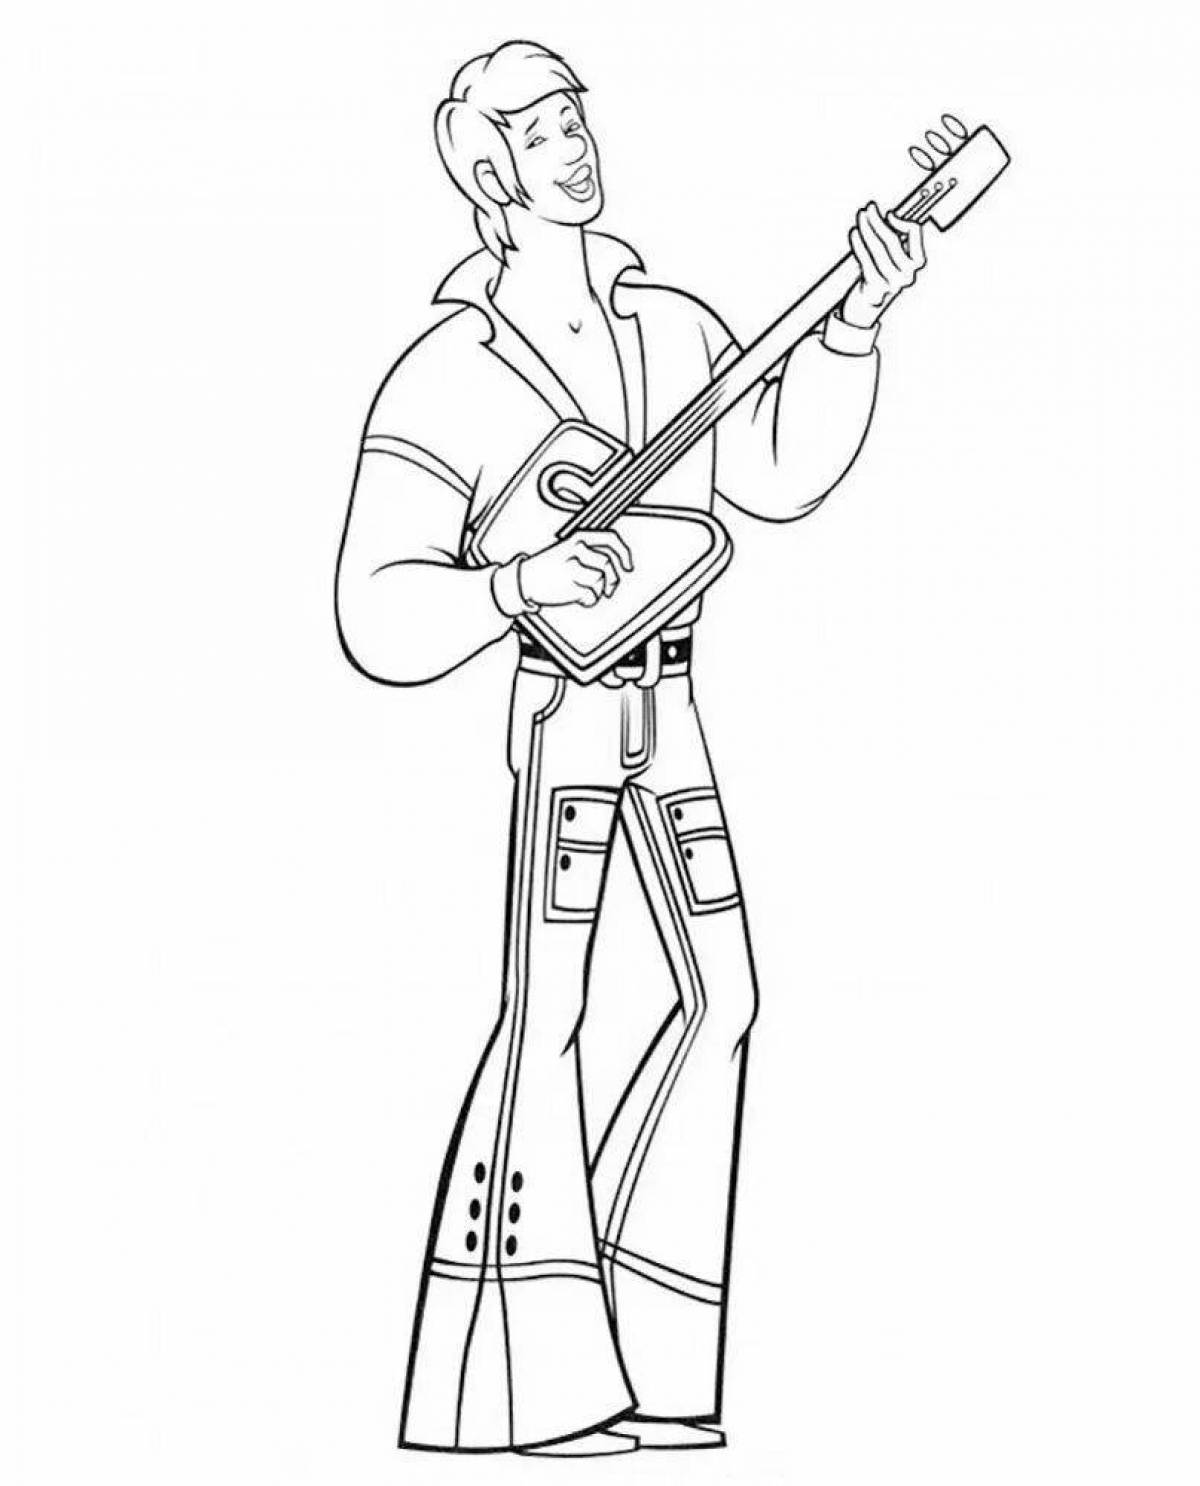 Coloring page energetic troubadour